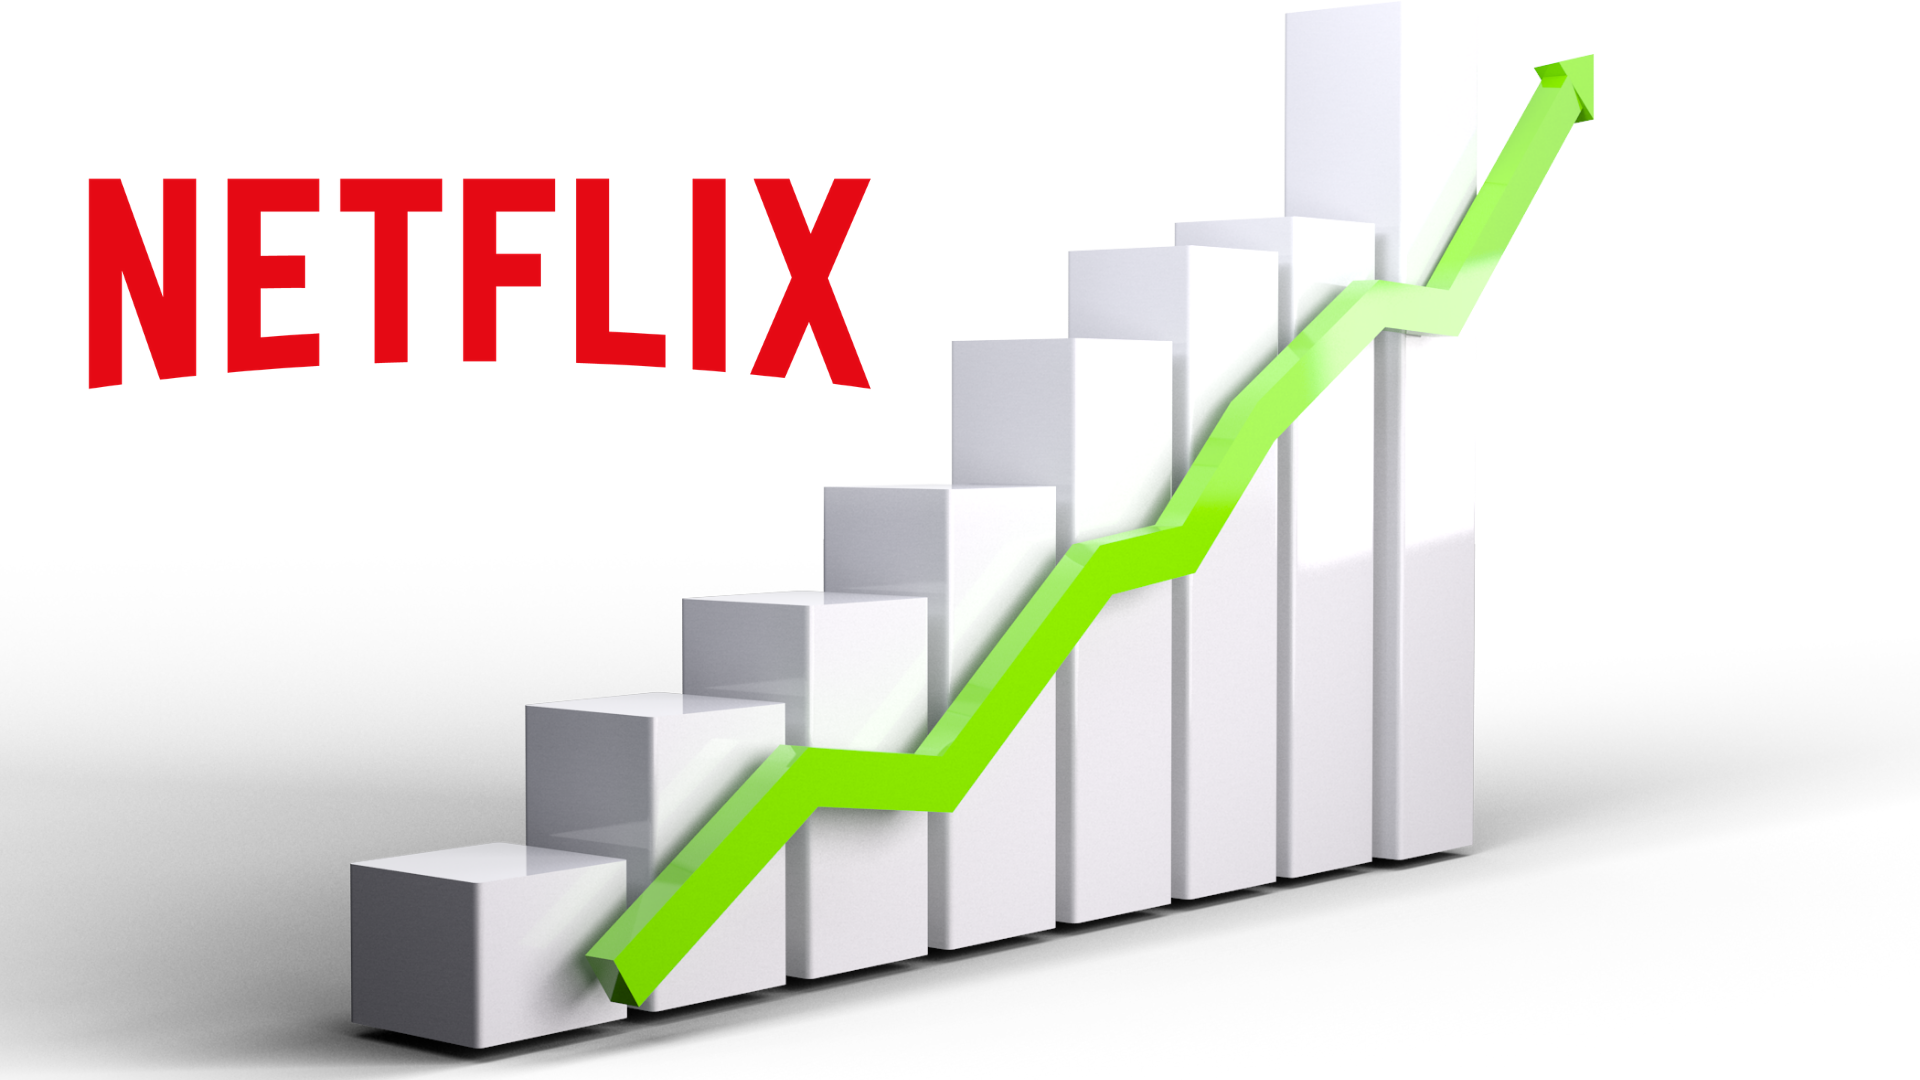 Netflix is now worth more than Disney, The Average American Is Streaming 8 Hours of Content Daily and other top news